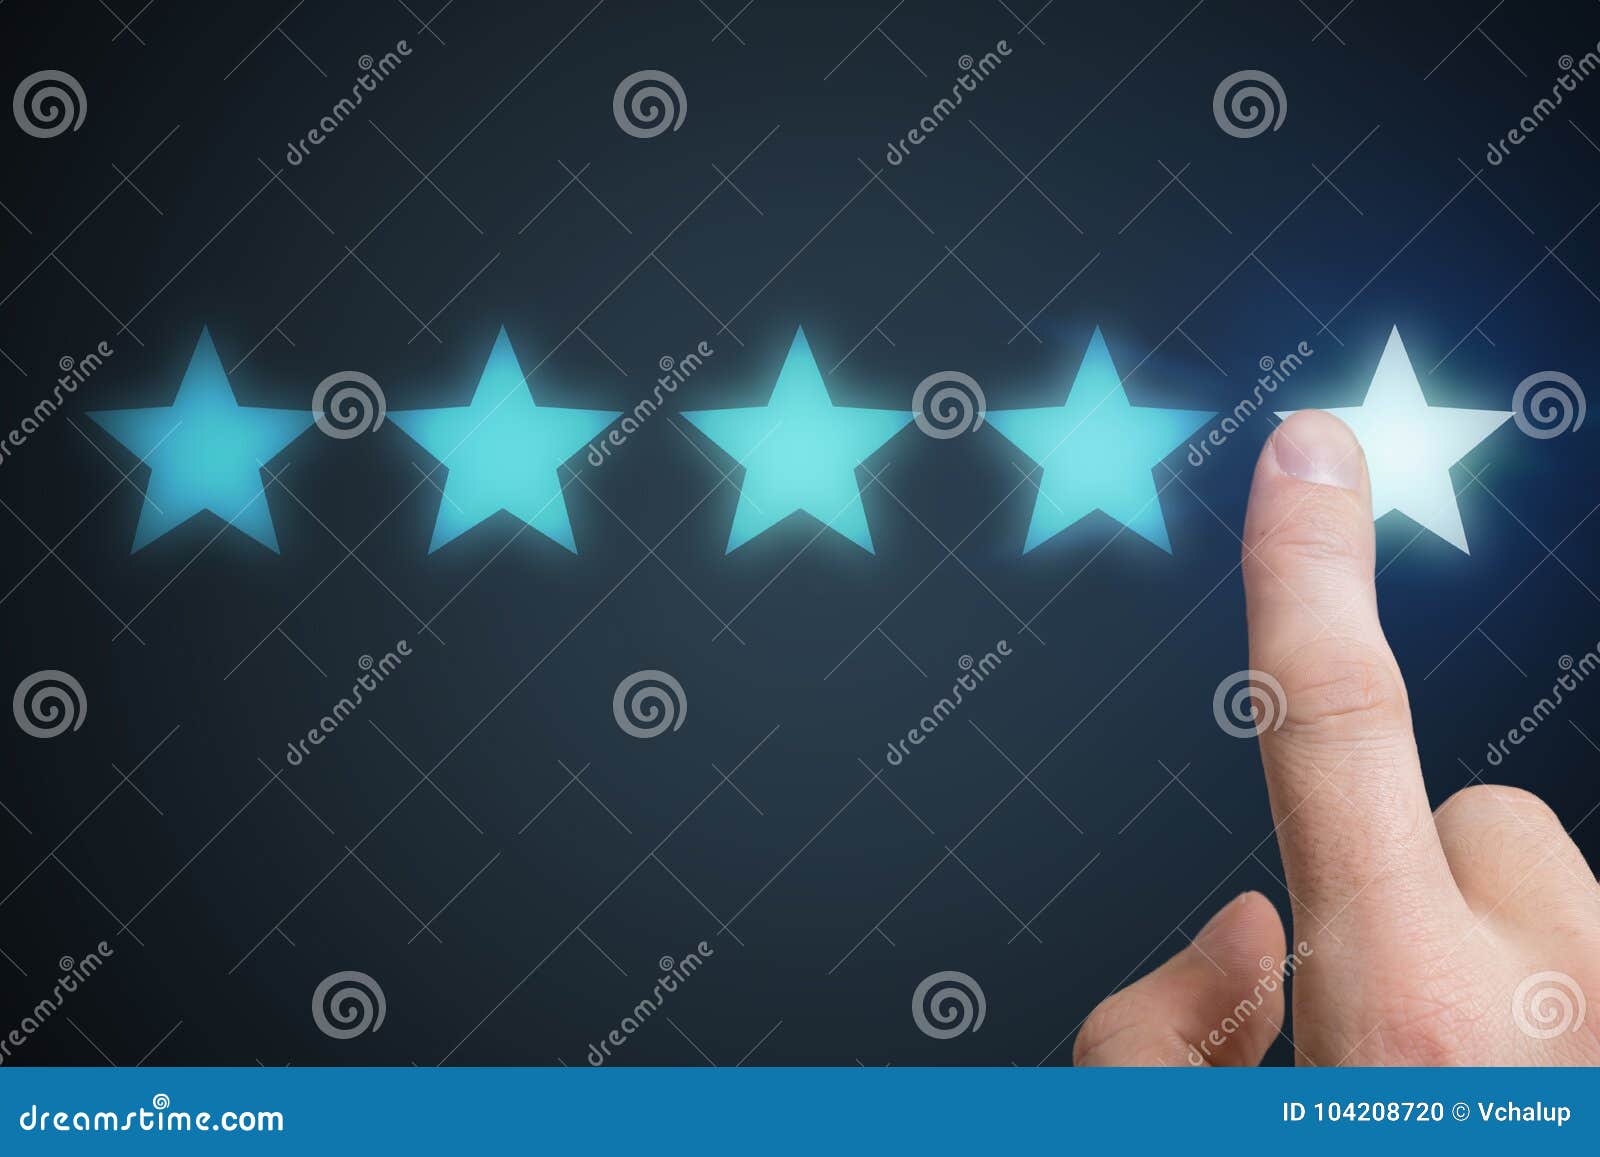 human hand is rating with 5 stars. ranking and customer satisfaction concept